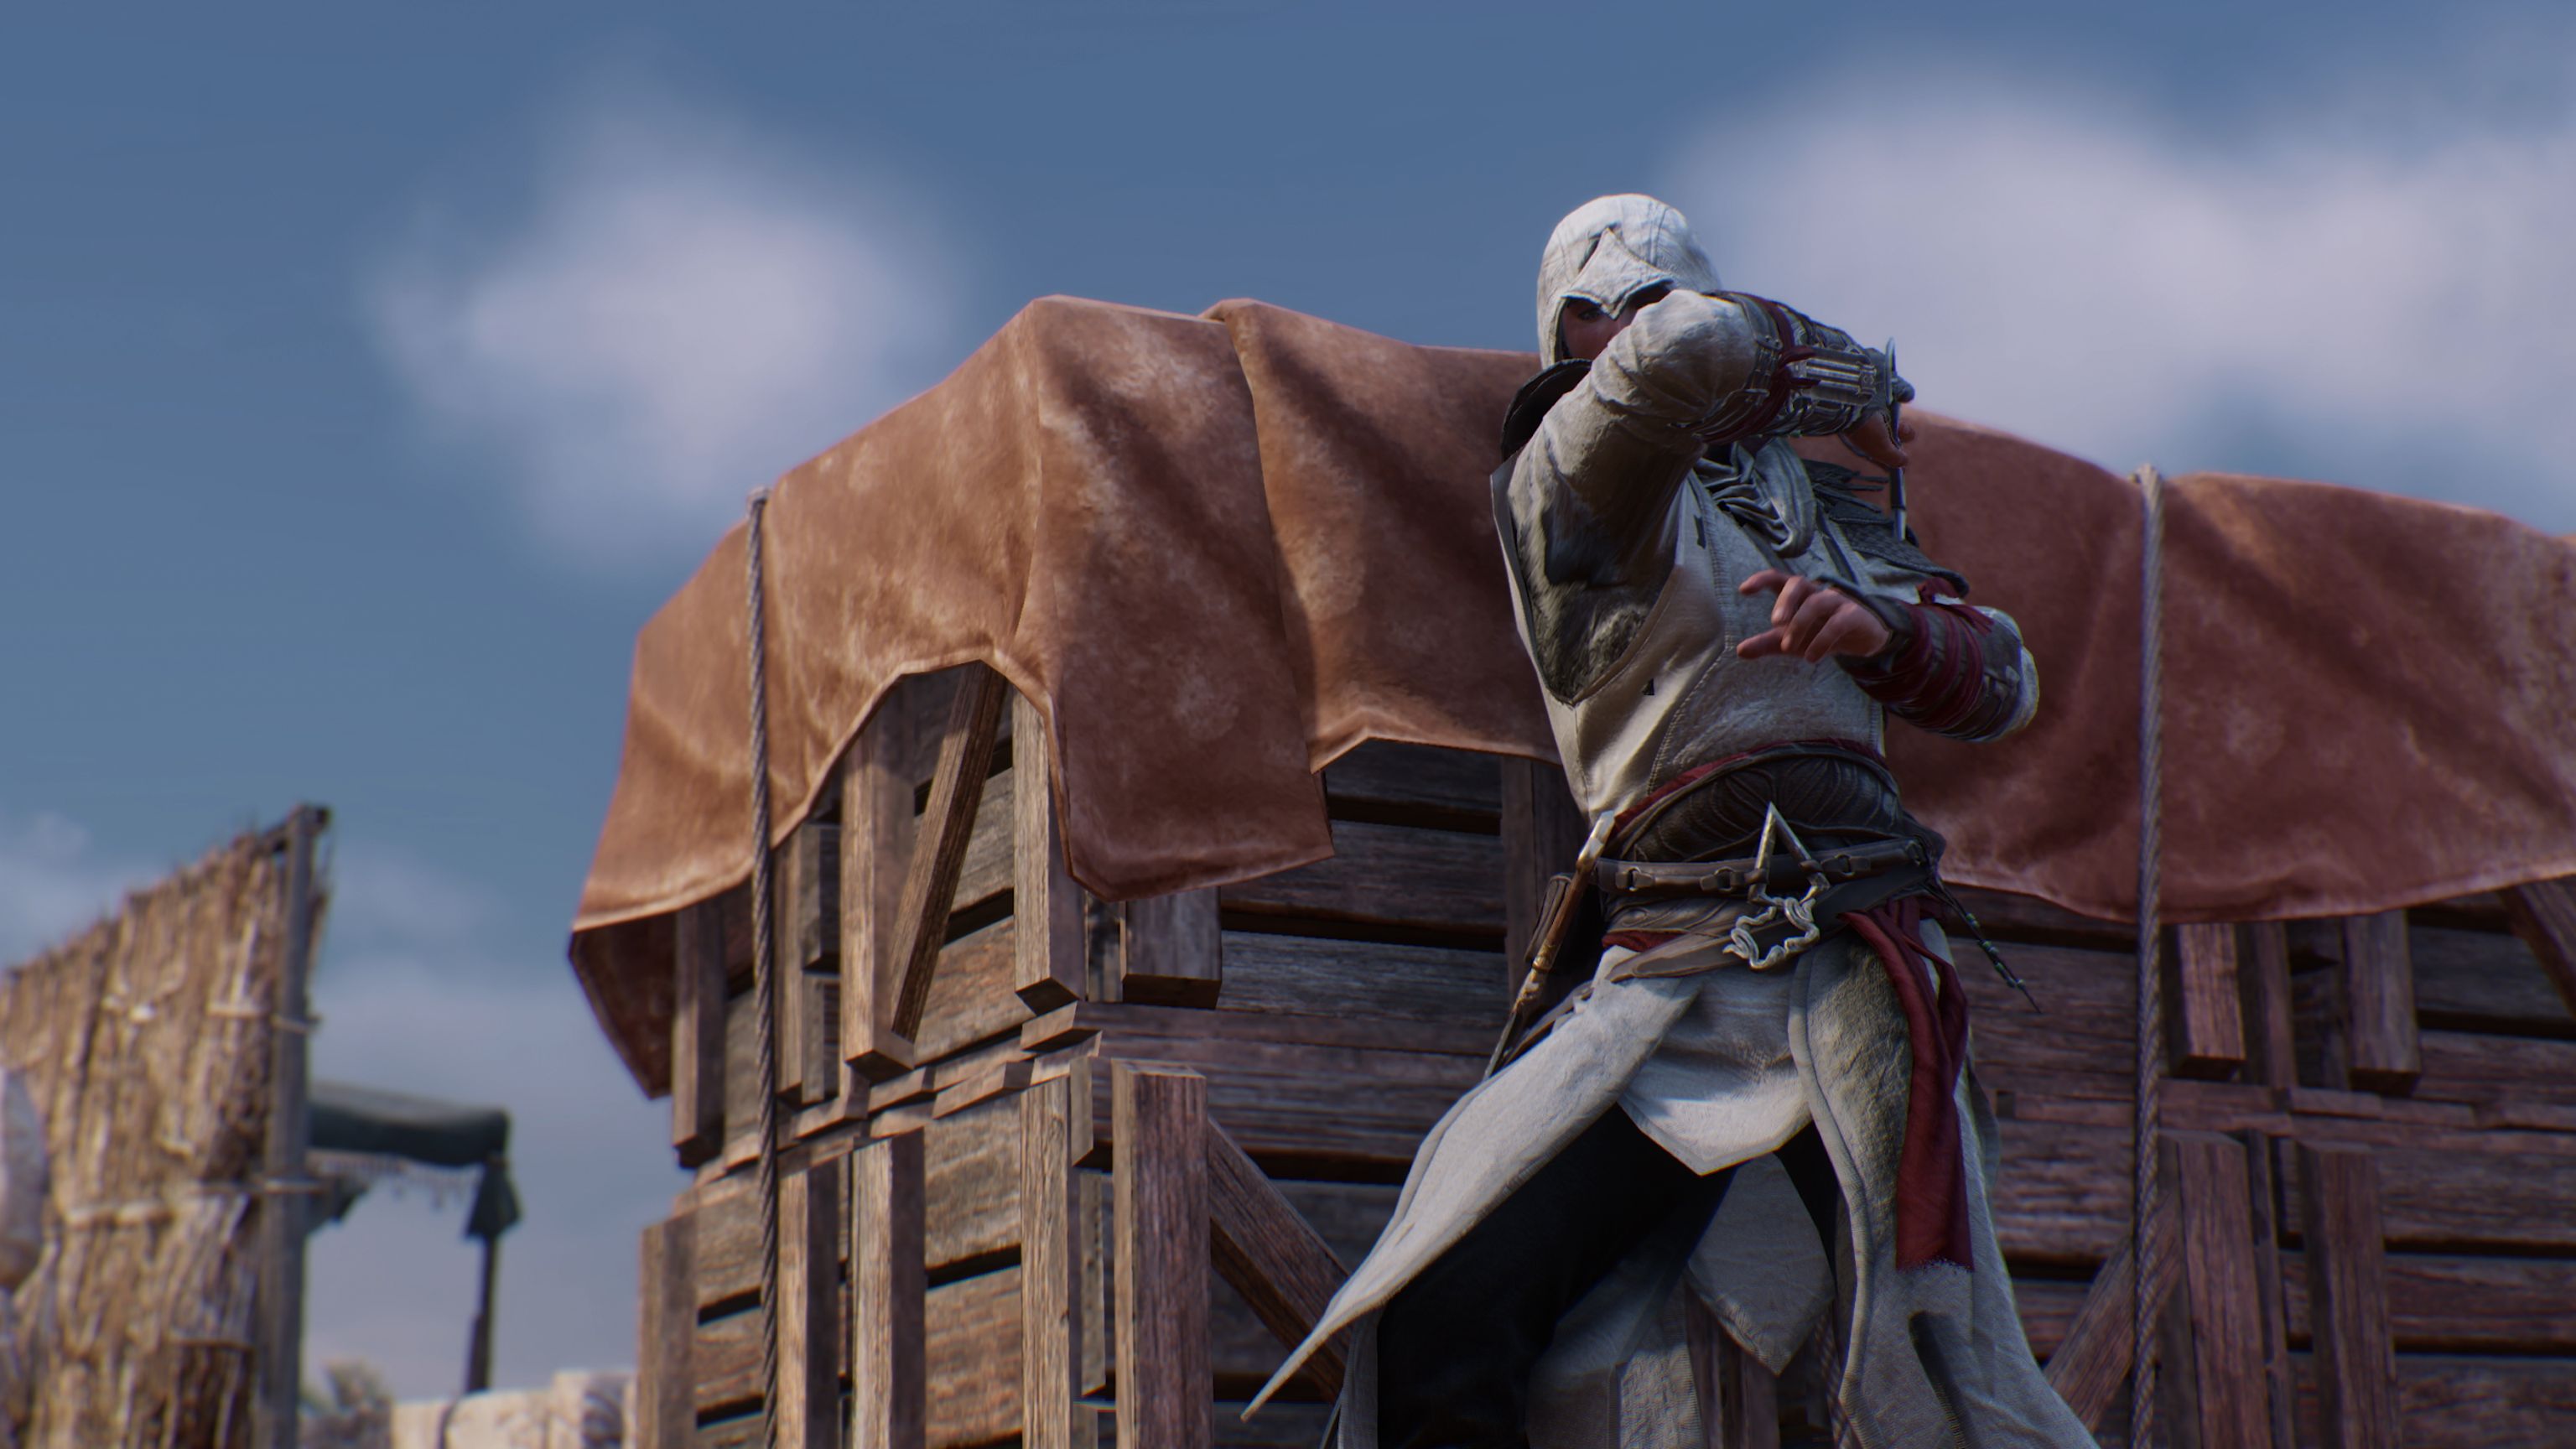 PS4 Assassin's Creed Mirage (M18)